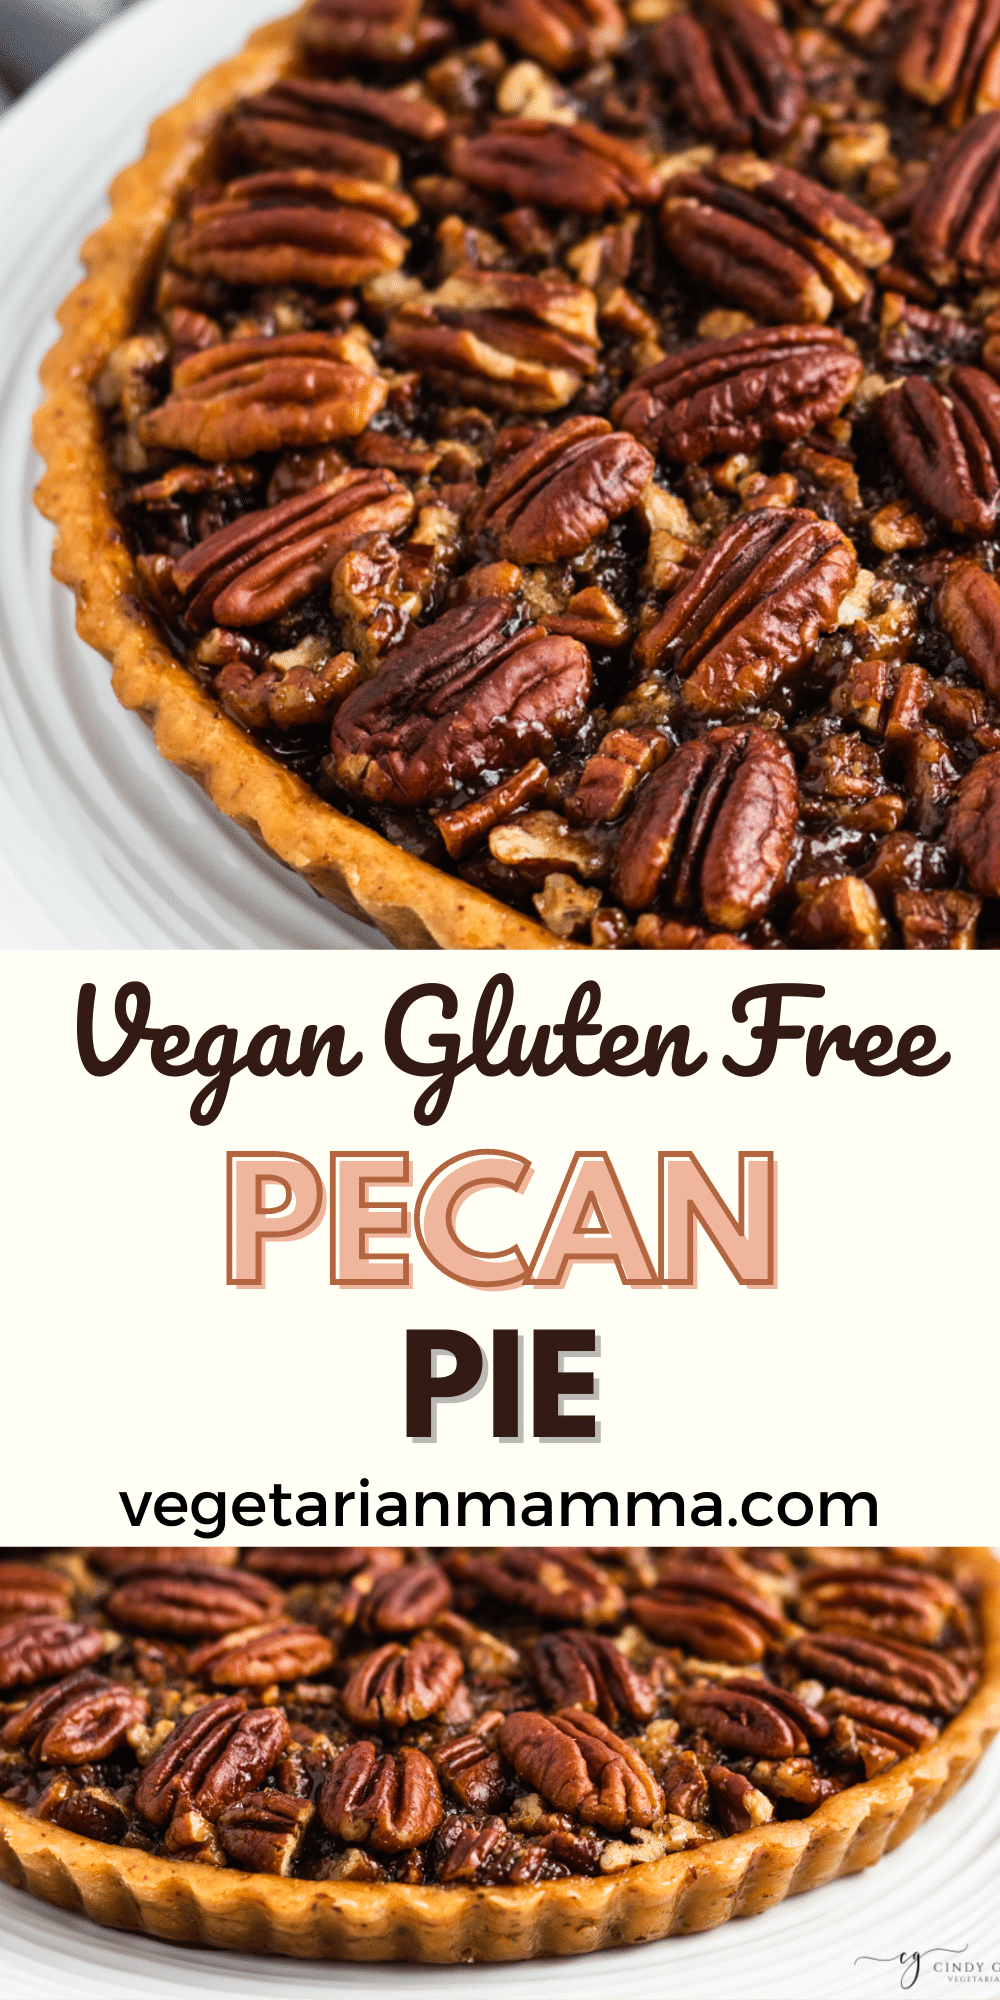 This Vegan Pecan Pie is so sugary and rich, no one will believe it's dairy and egg free! This recipe also has no cornstarch and uses a homemade gluten-free crust.